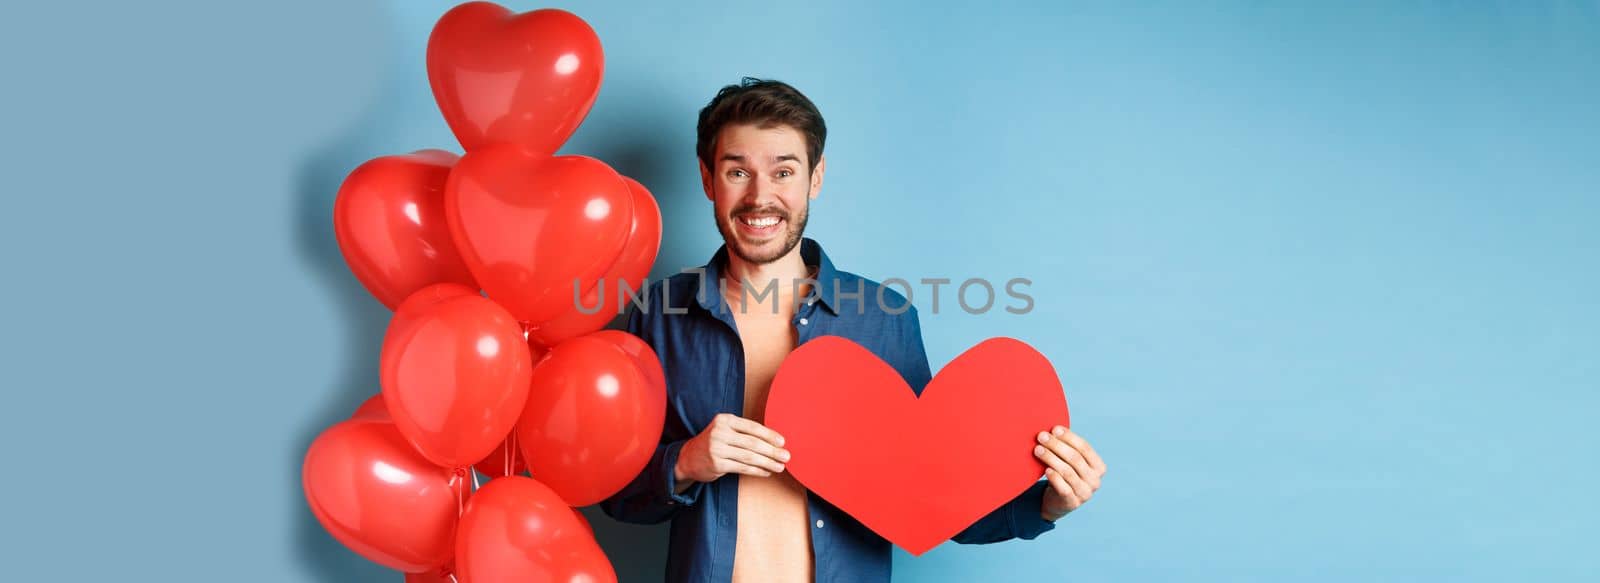 Valentines day concept. Smiling man say I love you, holding paper red heart cutout, standing near romantic balloons, blue background.